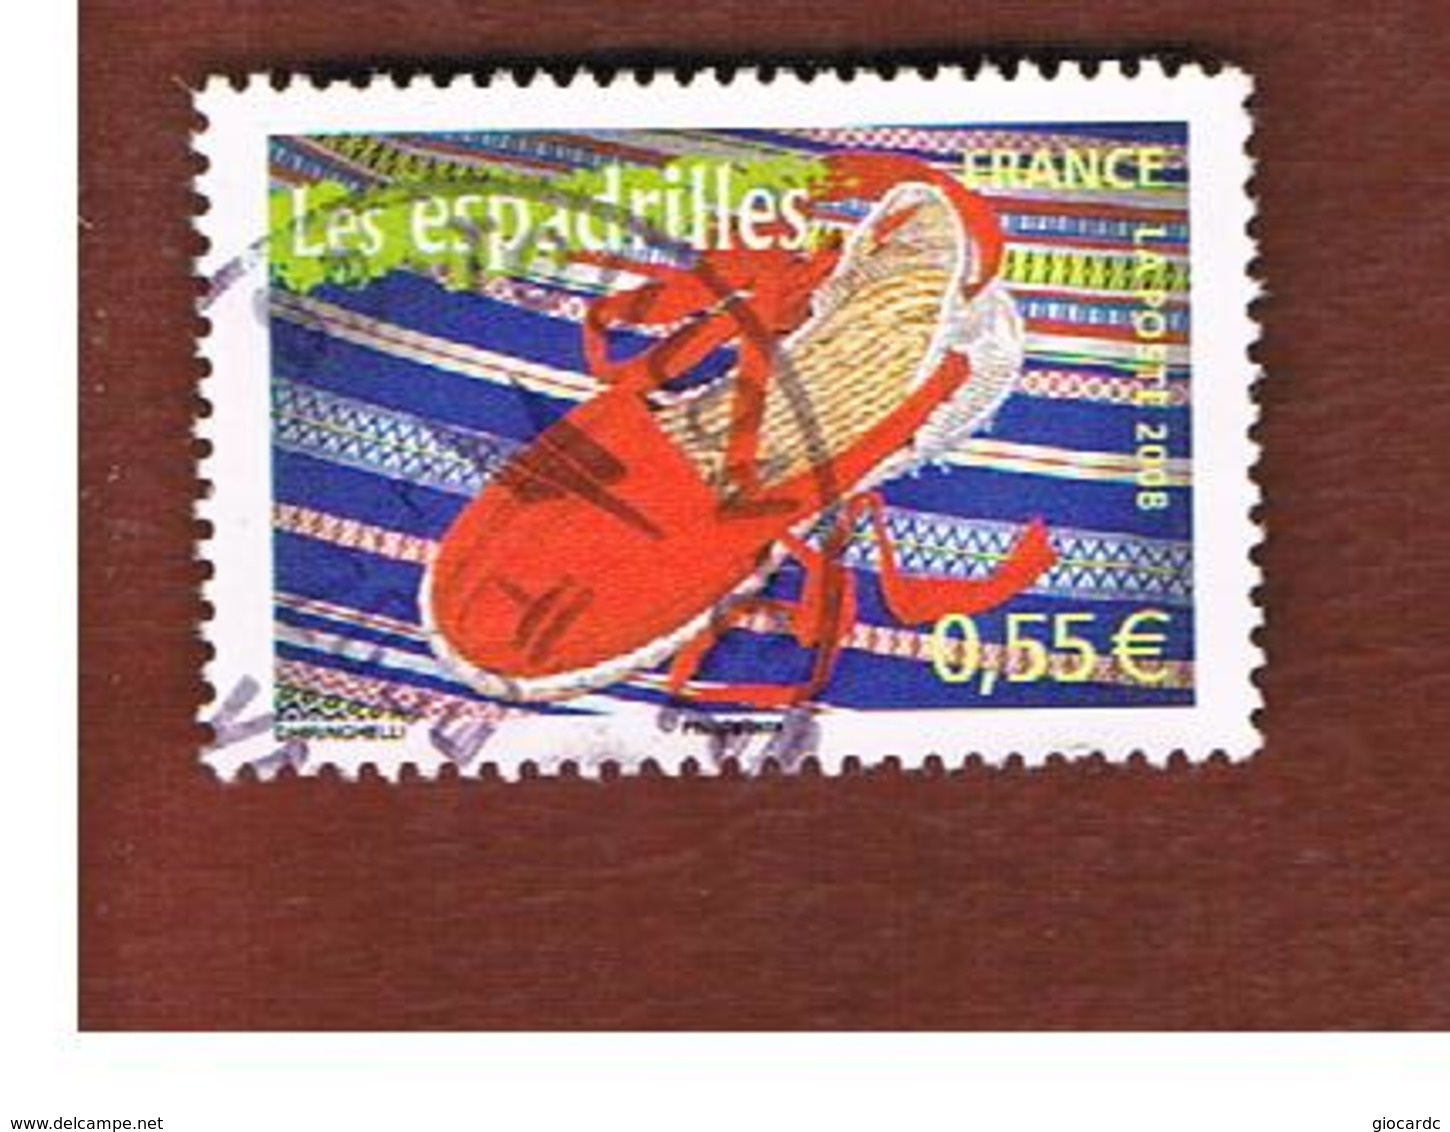 FRANCIA (FRANCE) -  YV 4260   -           2008  ESPADRILLES                (FROM BF)      - USED - Usati